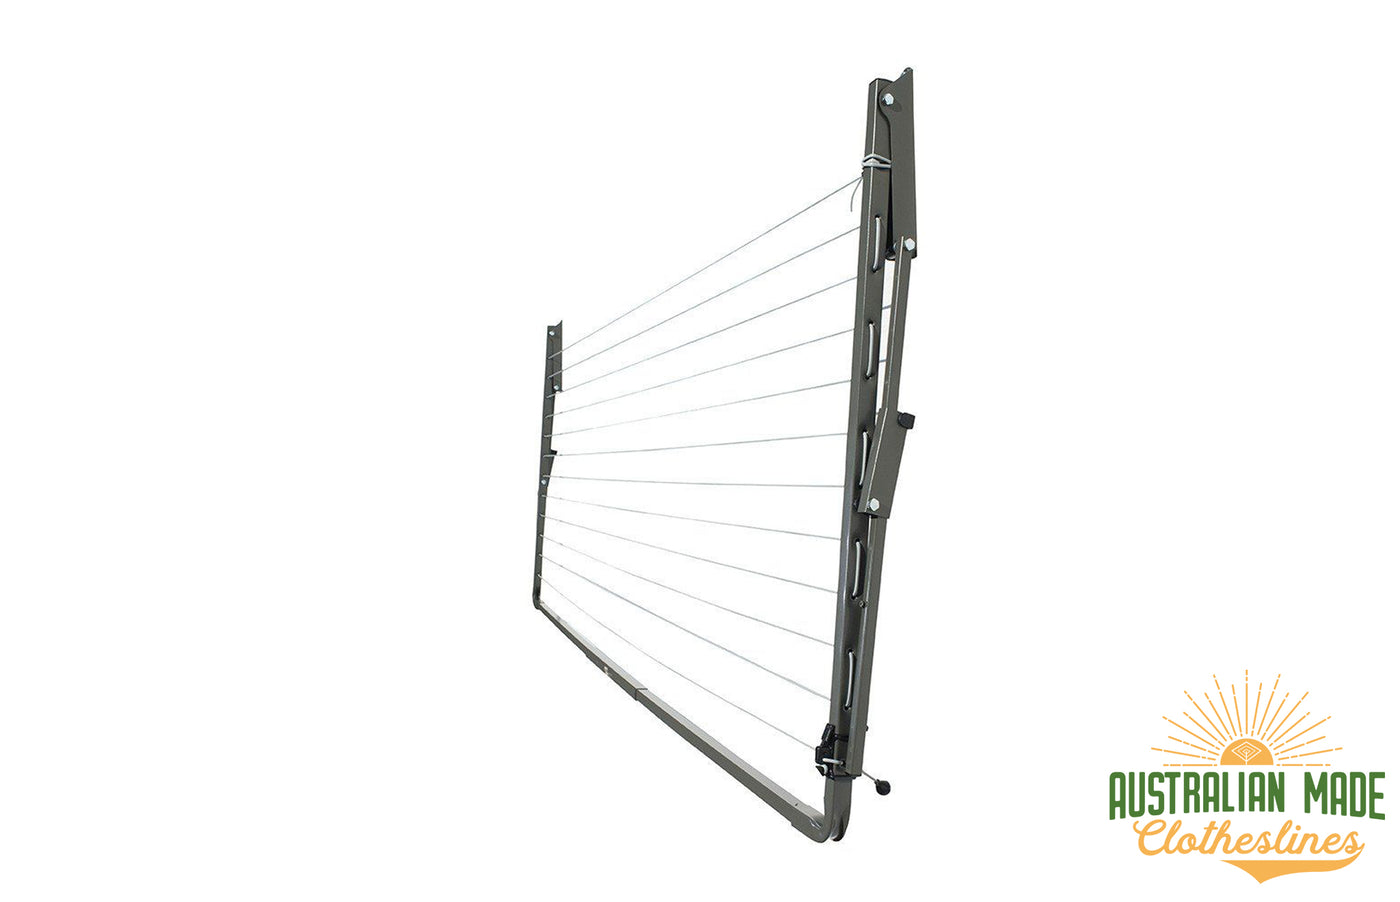 Austral Compact 28 Clothesline - Folded Down - Australian Made Clotheslines